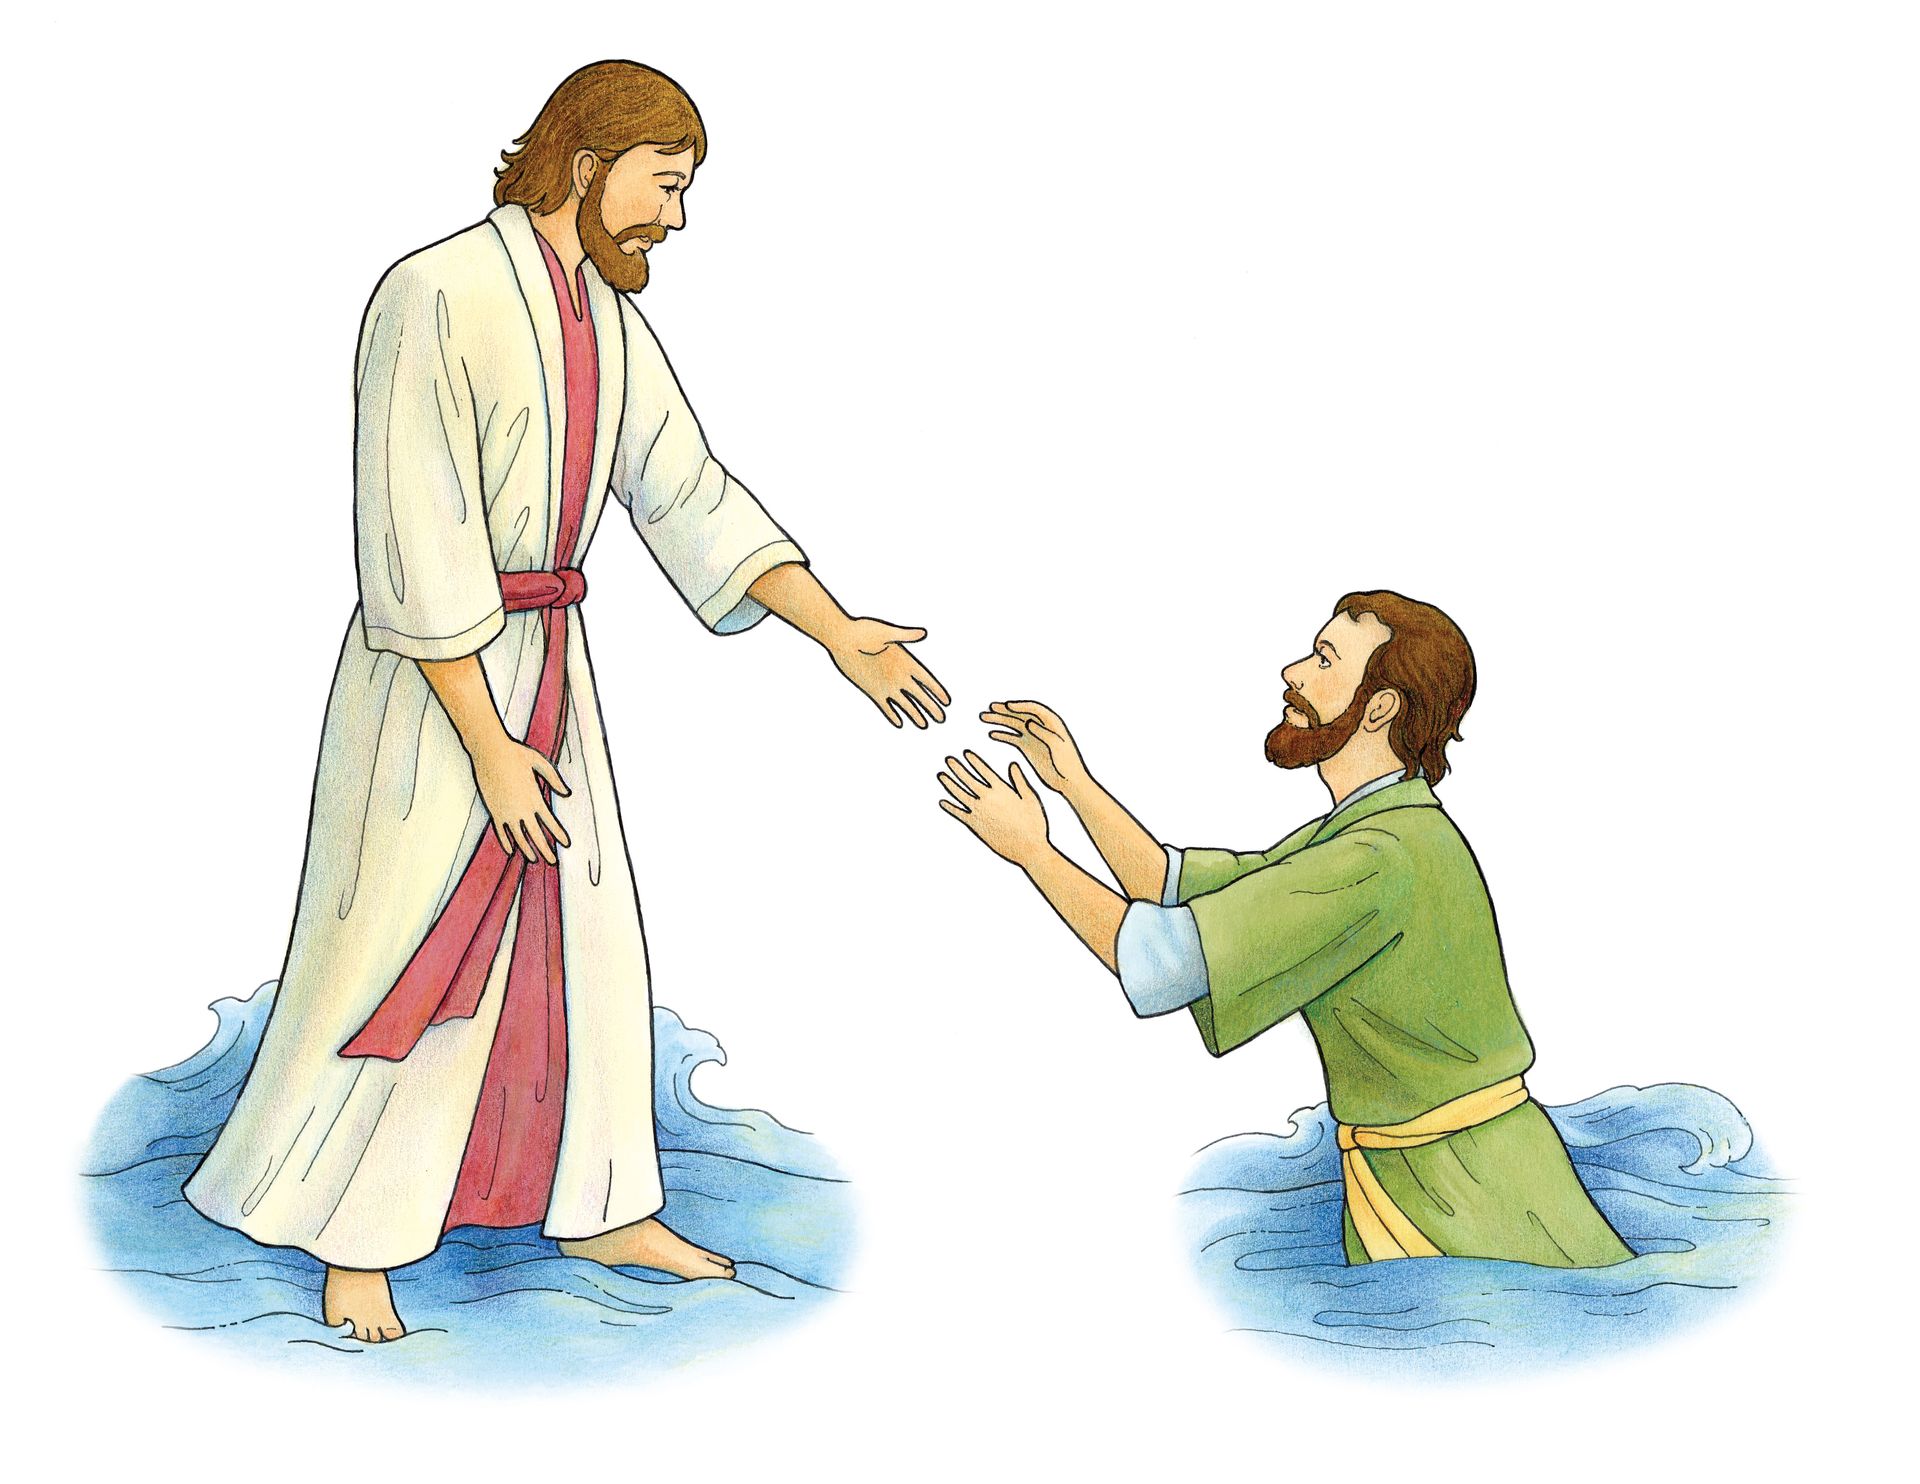 Jesus walking on water and reaching for Peter, who is sinking.